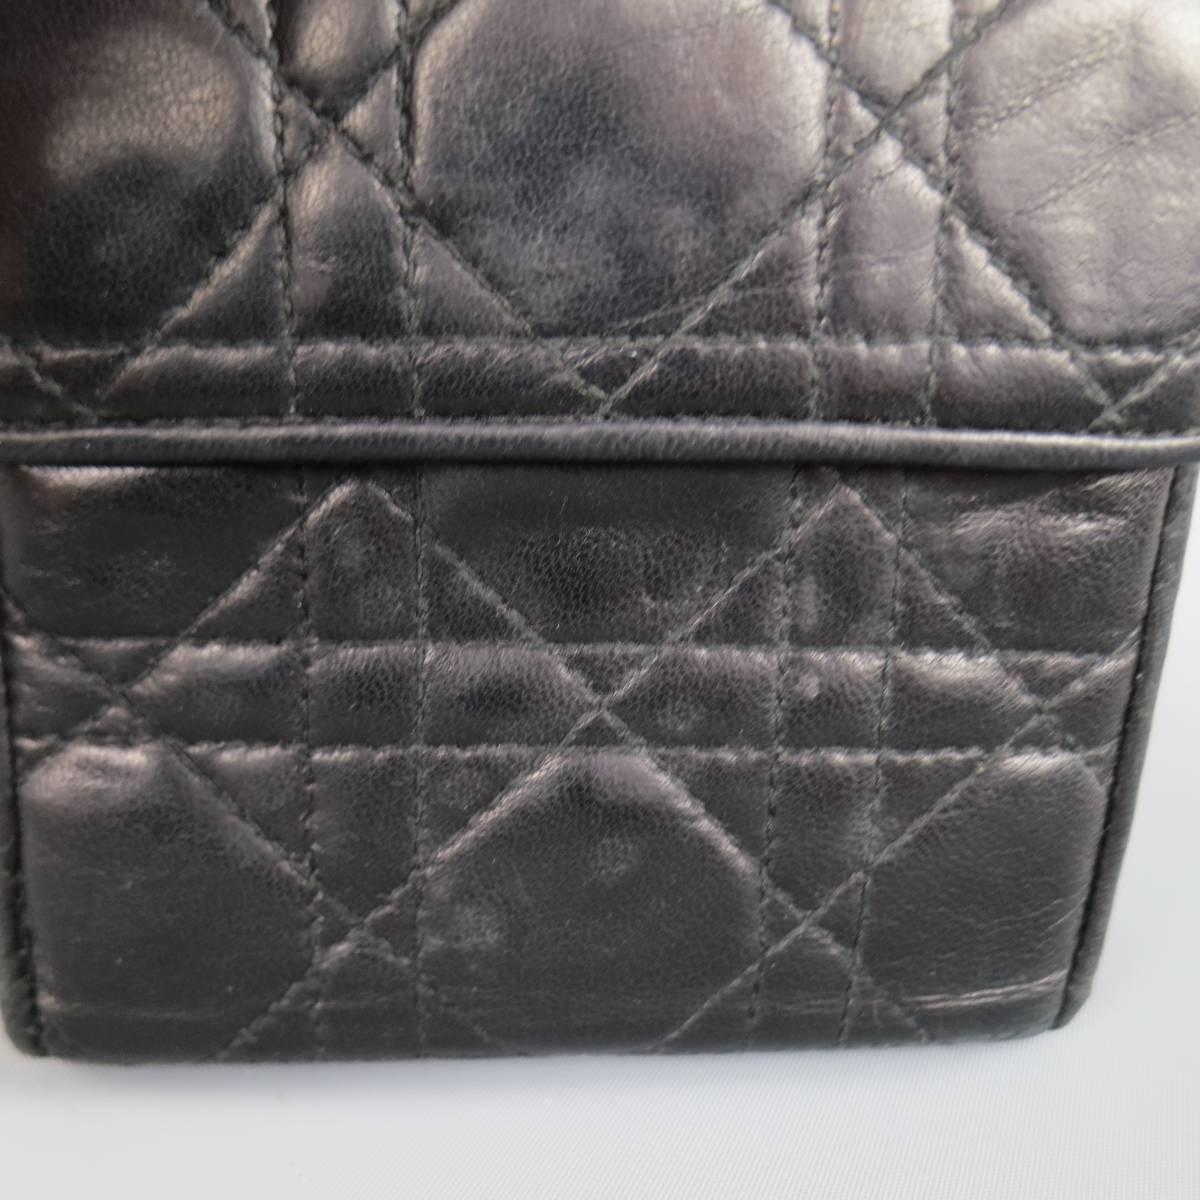 Vintage CHRISTIAN DIOR bi-fold wallet in signature Cannage embroidered soft black leather featuring a flap snap closure, back zip pouch with CD charm, and insternal card and money storage with red liner. Wear throughout. Made in Italy.
 
Good